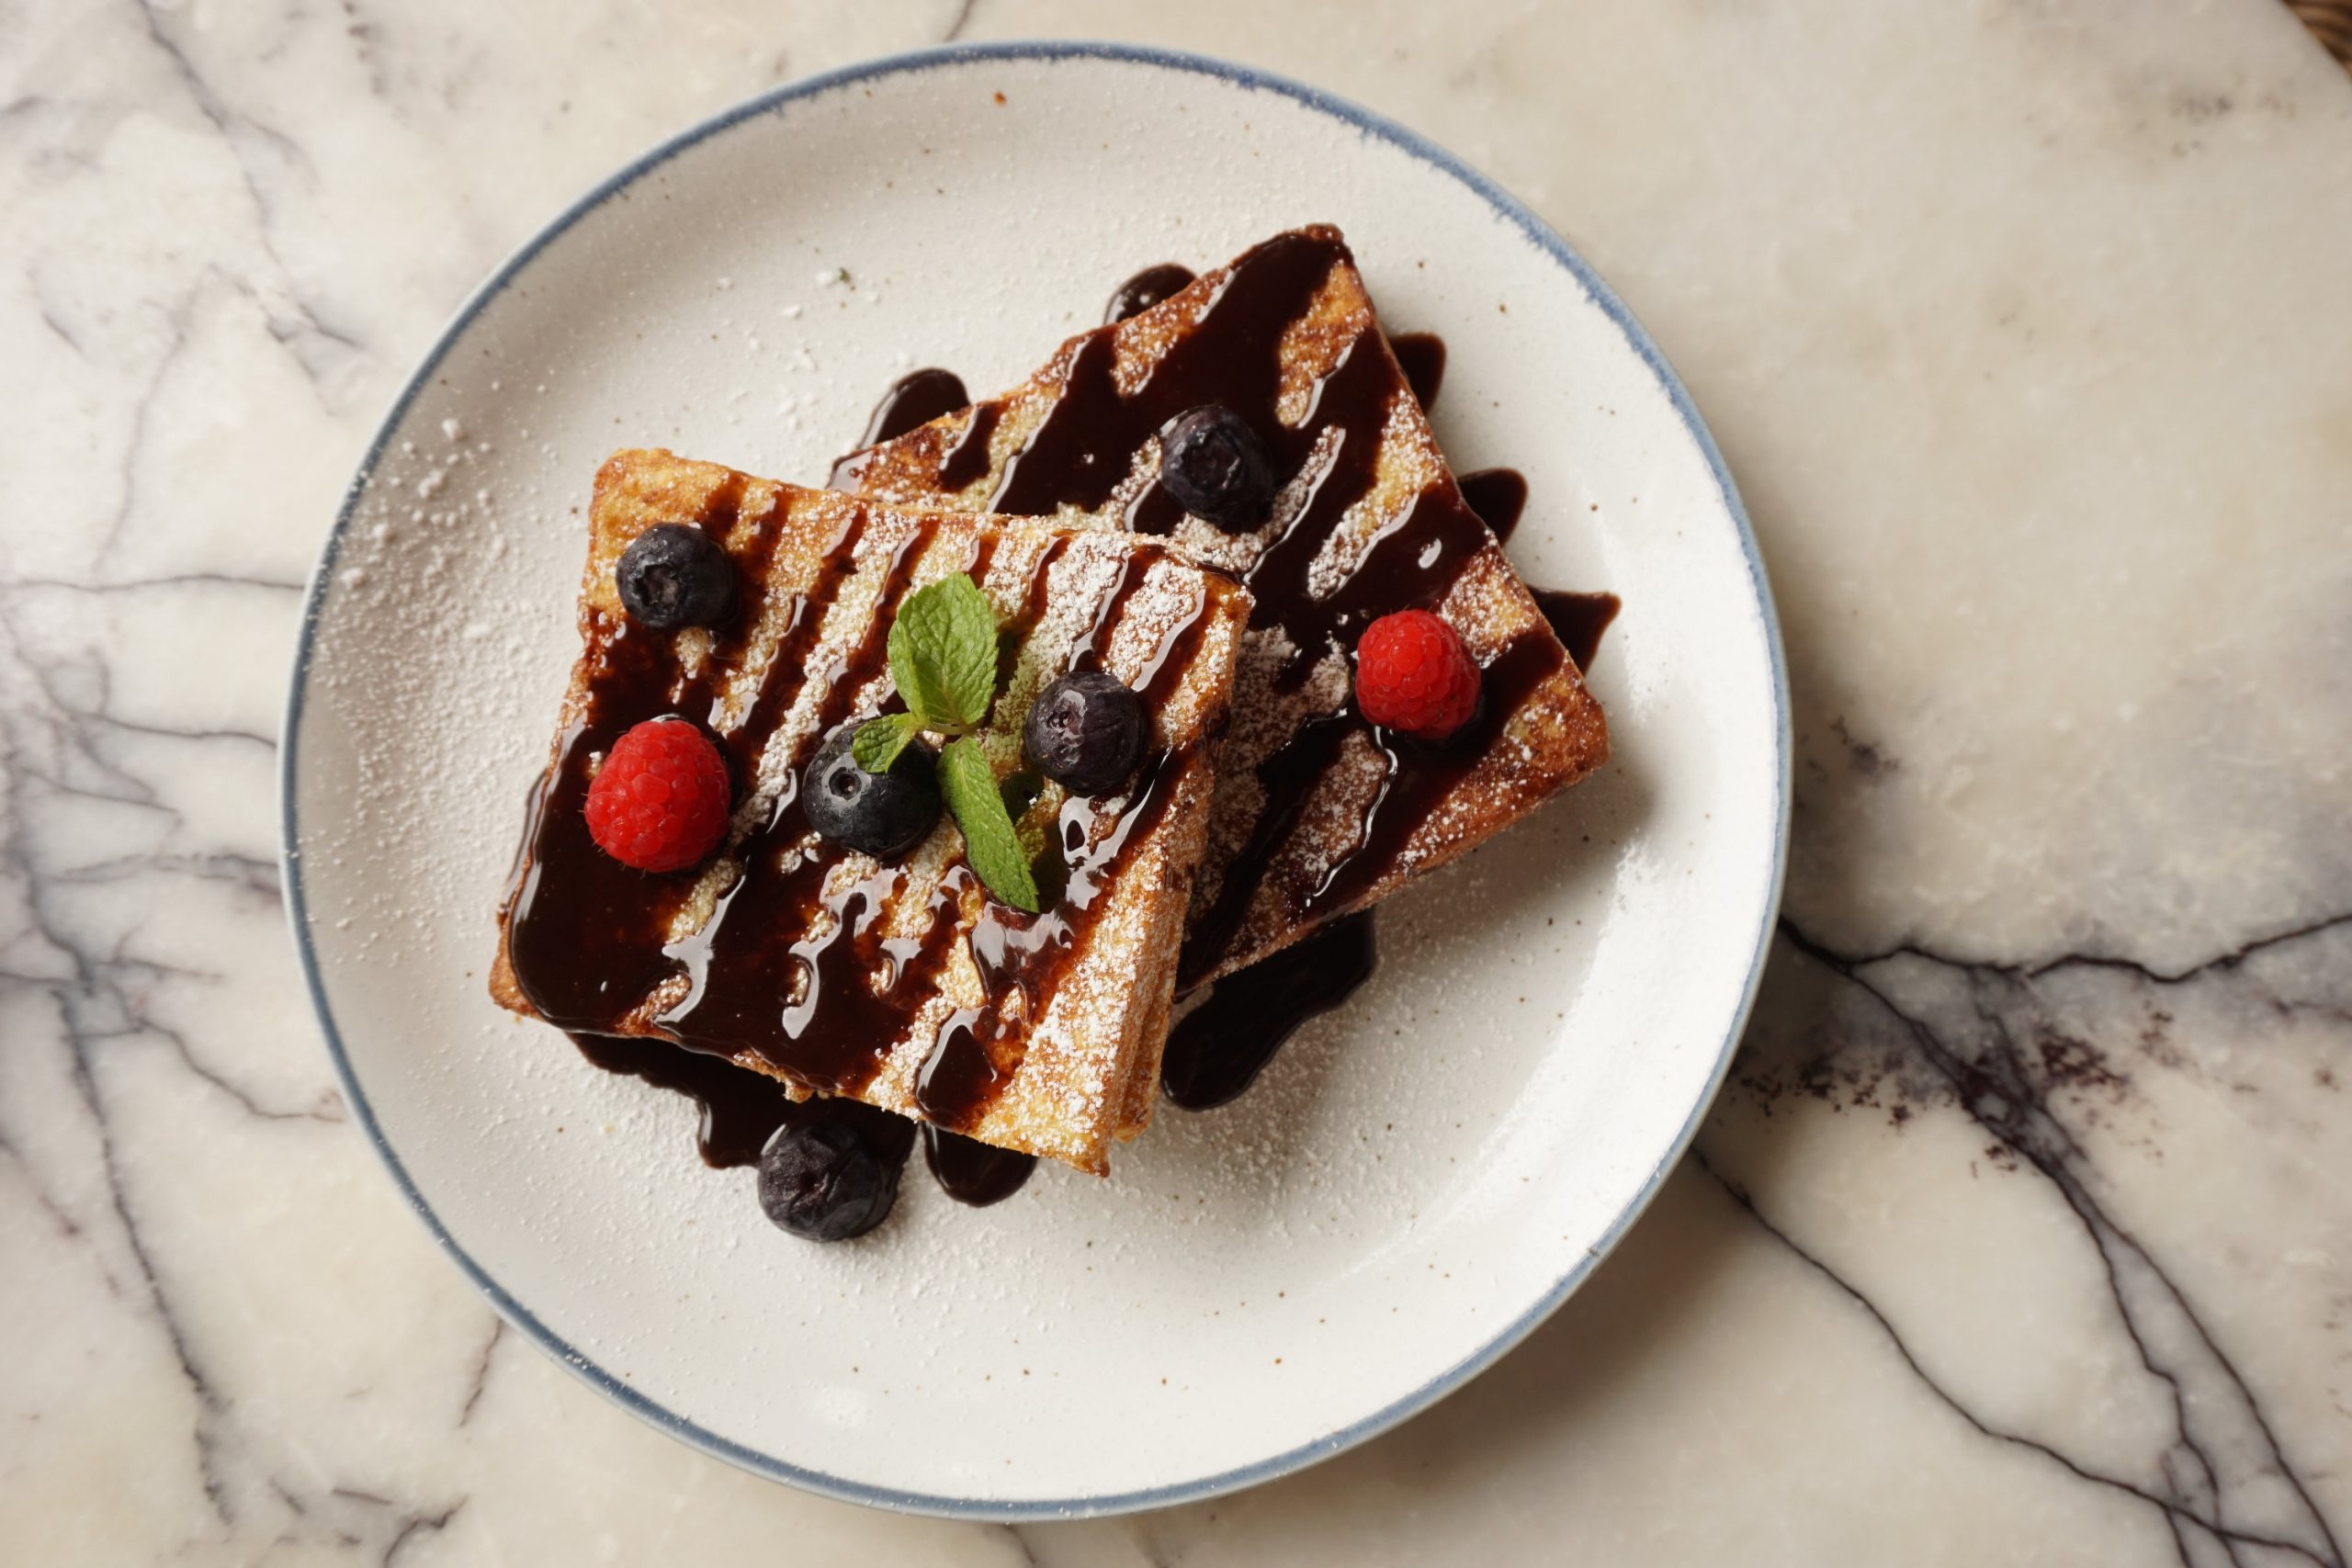 Berries French Toast (S$15++)